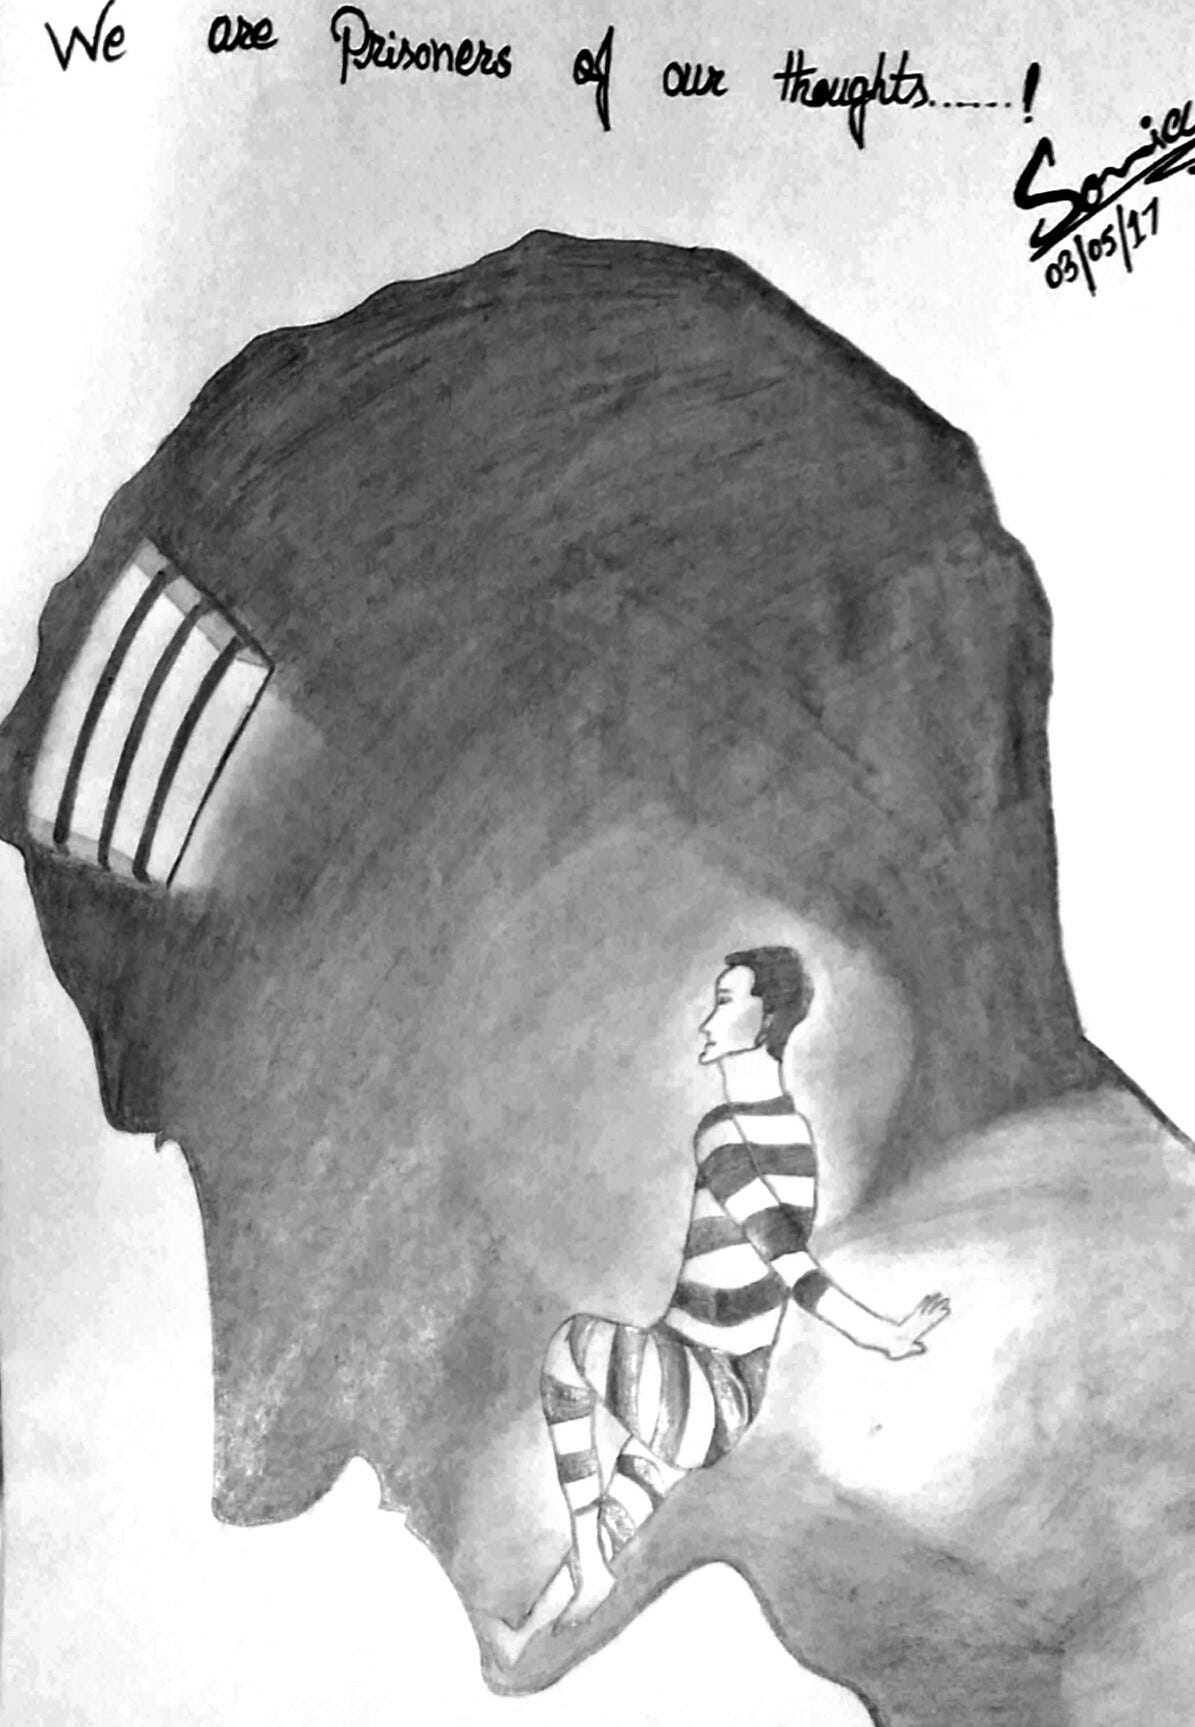 We are prisoners of our own thoughts! | by Sonia Javed | Medium